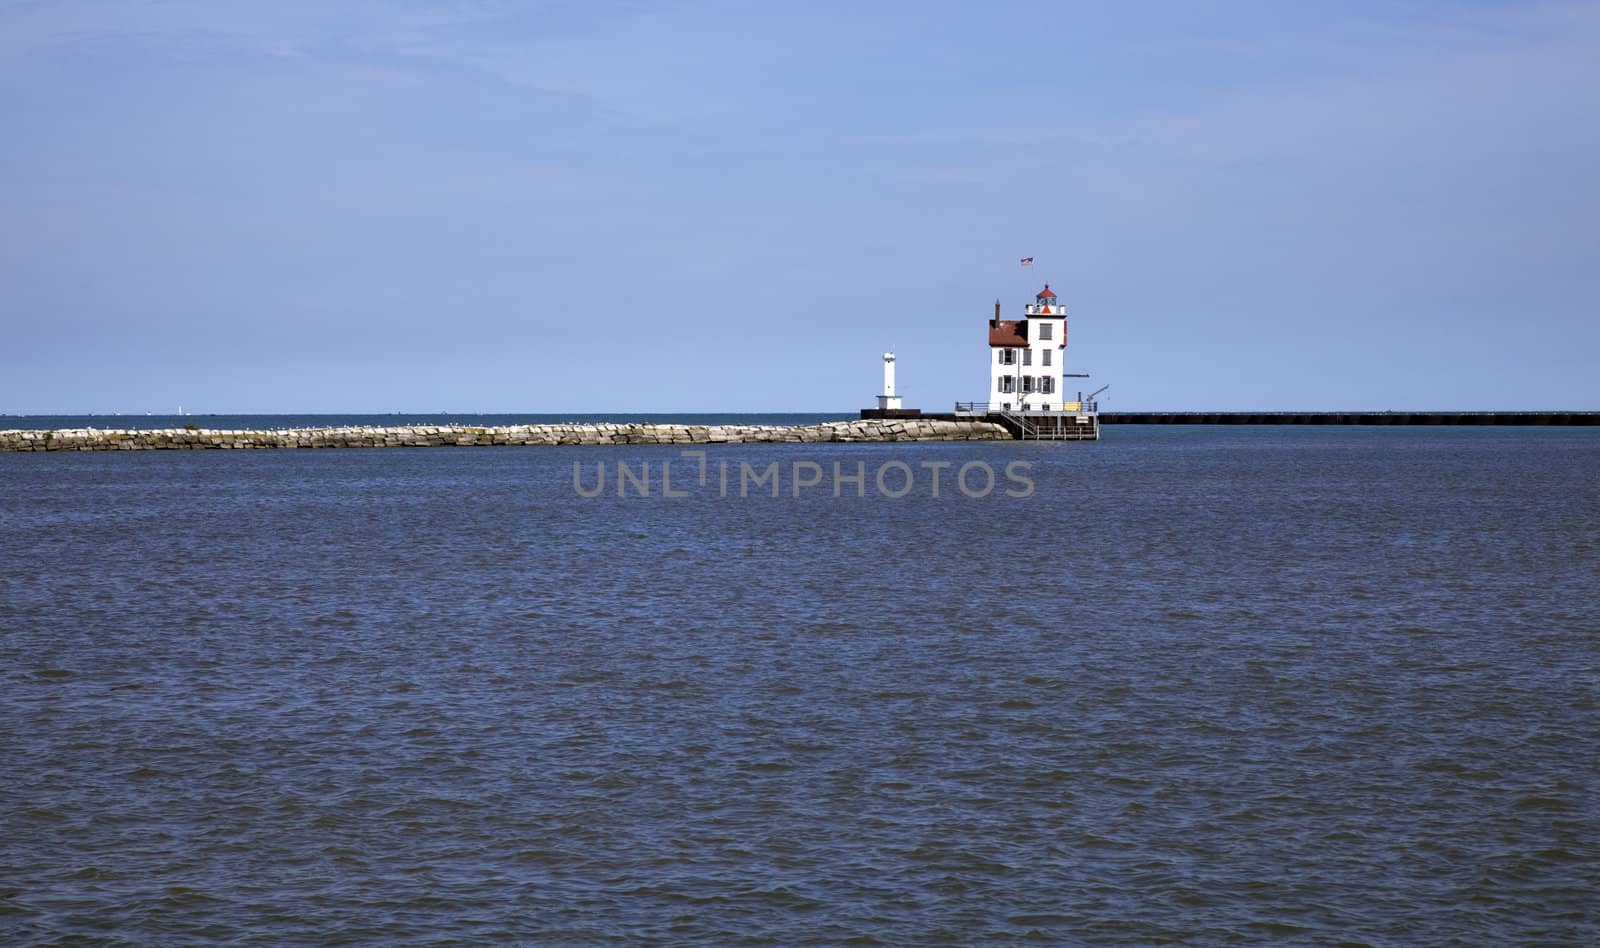 Distant view of Lorain Lighthouse